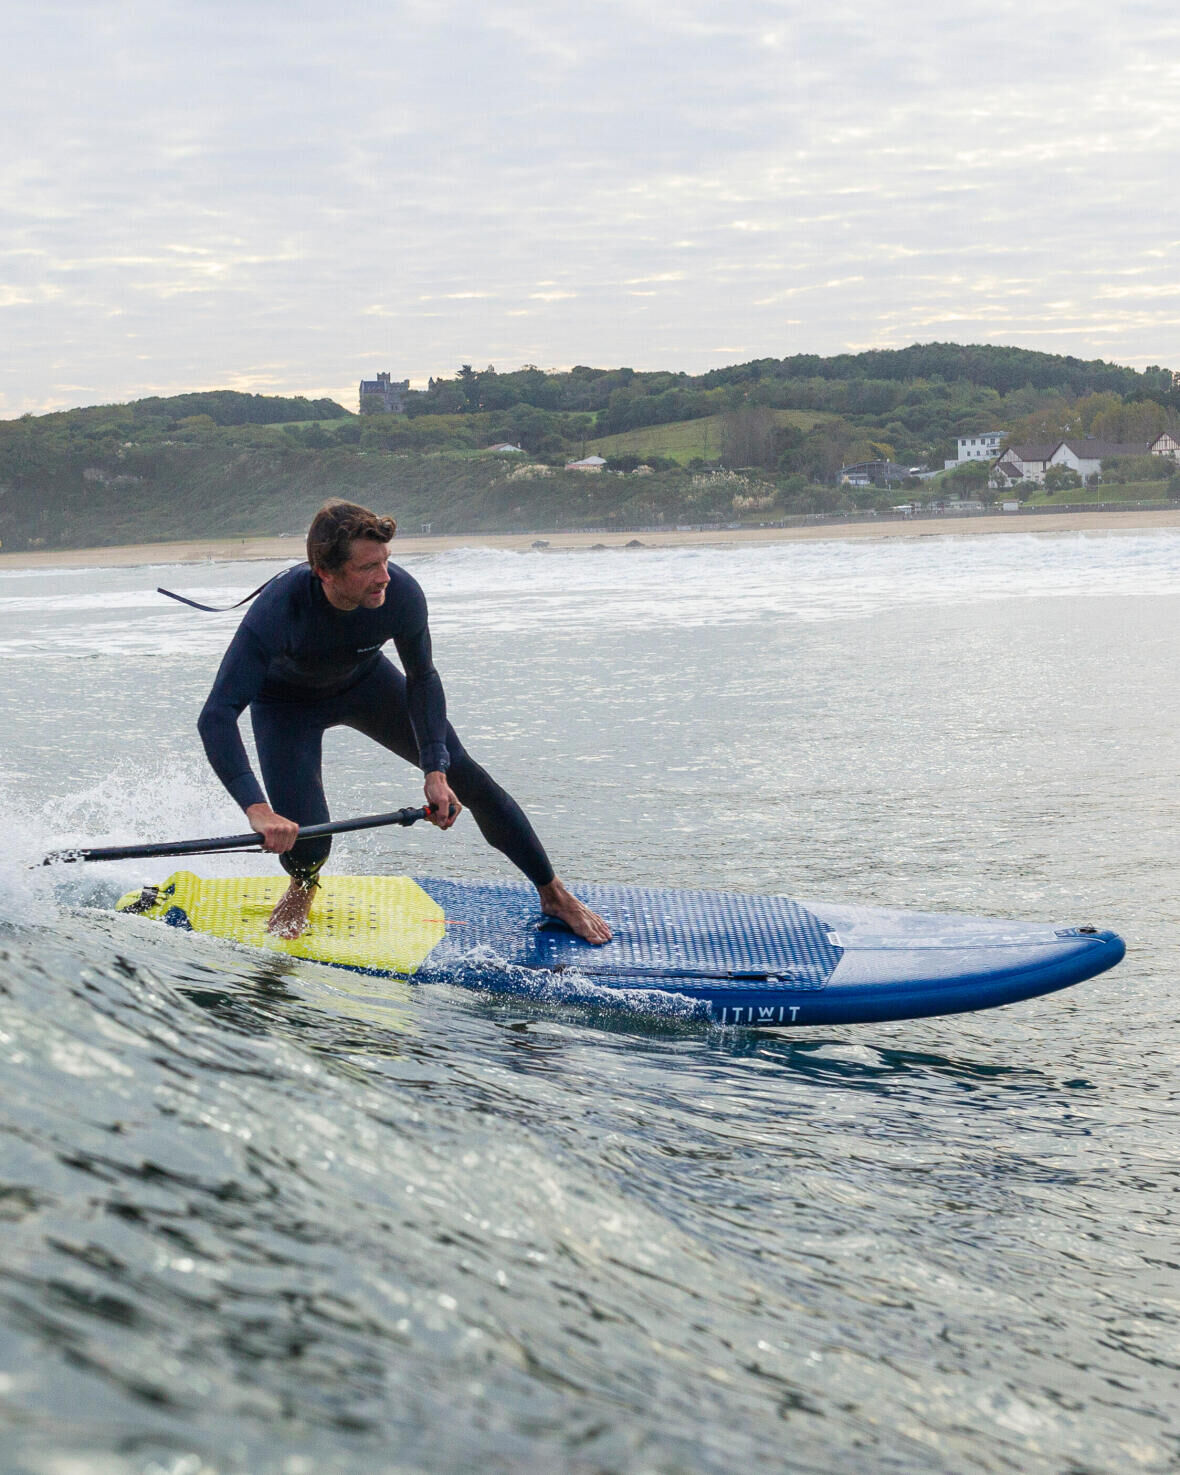 Surfing stand-up paddle board